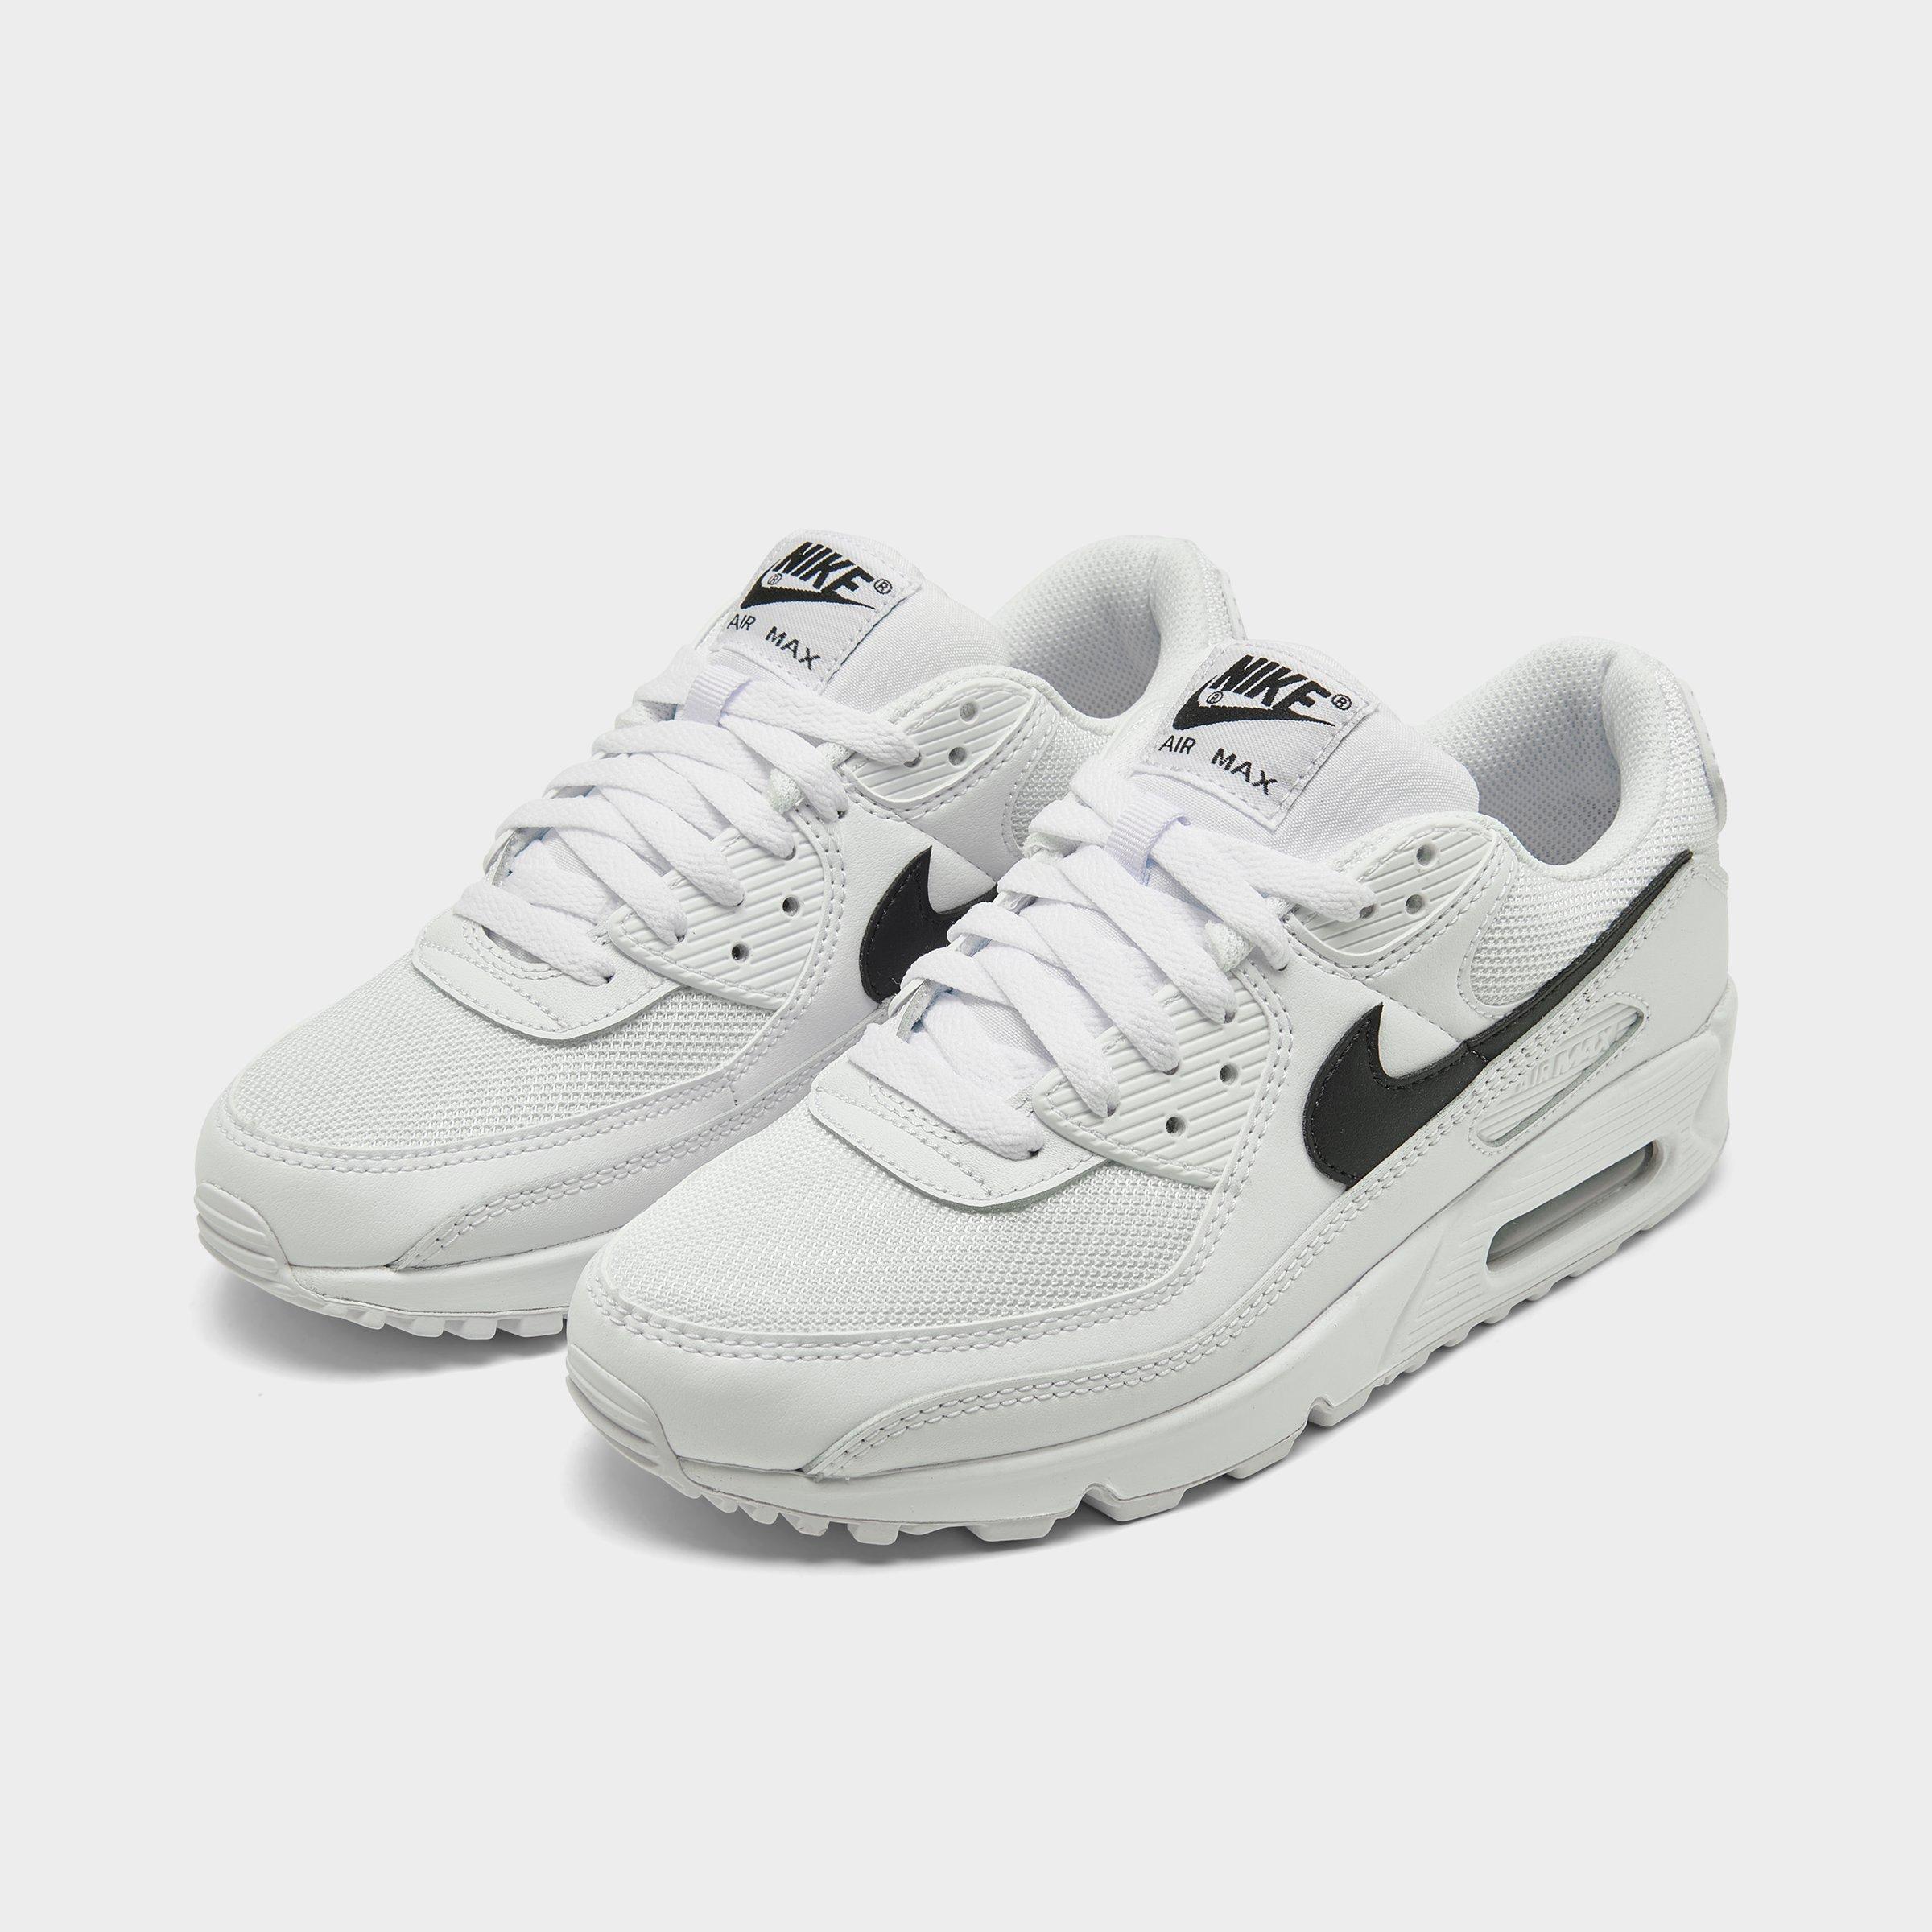 nike air max 90s white and black